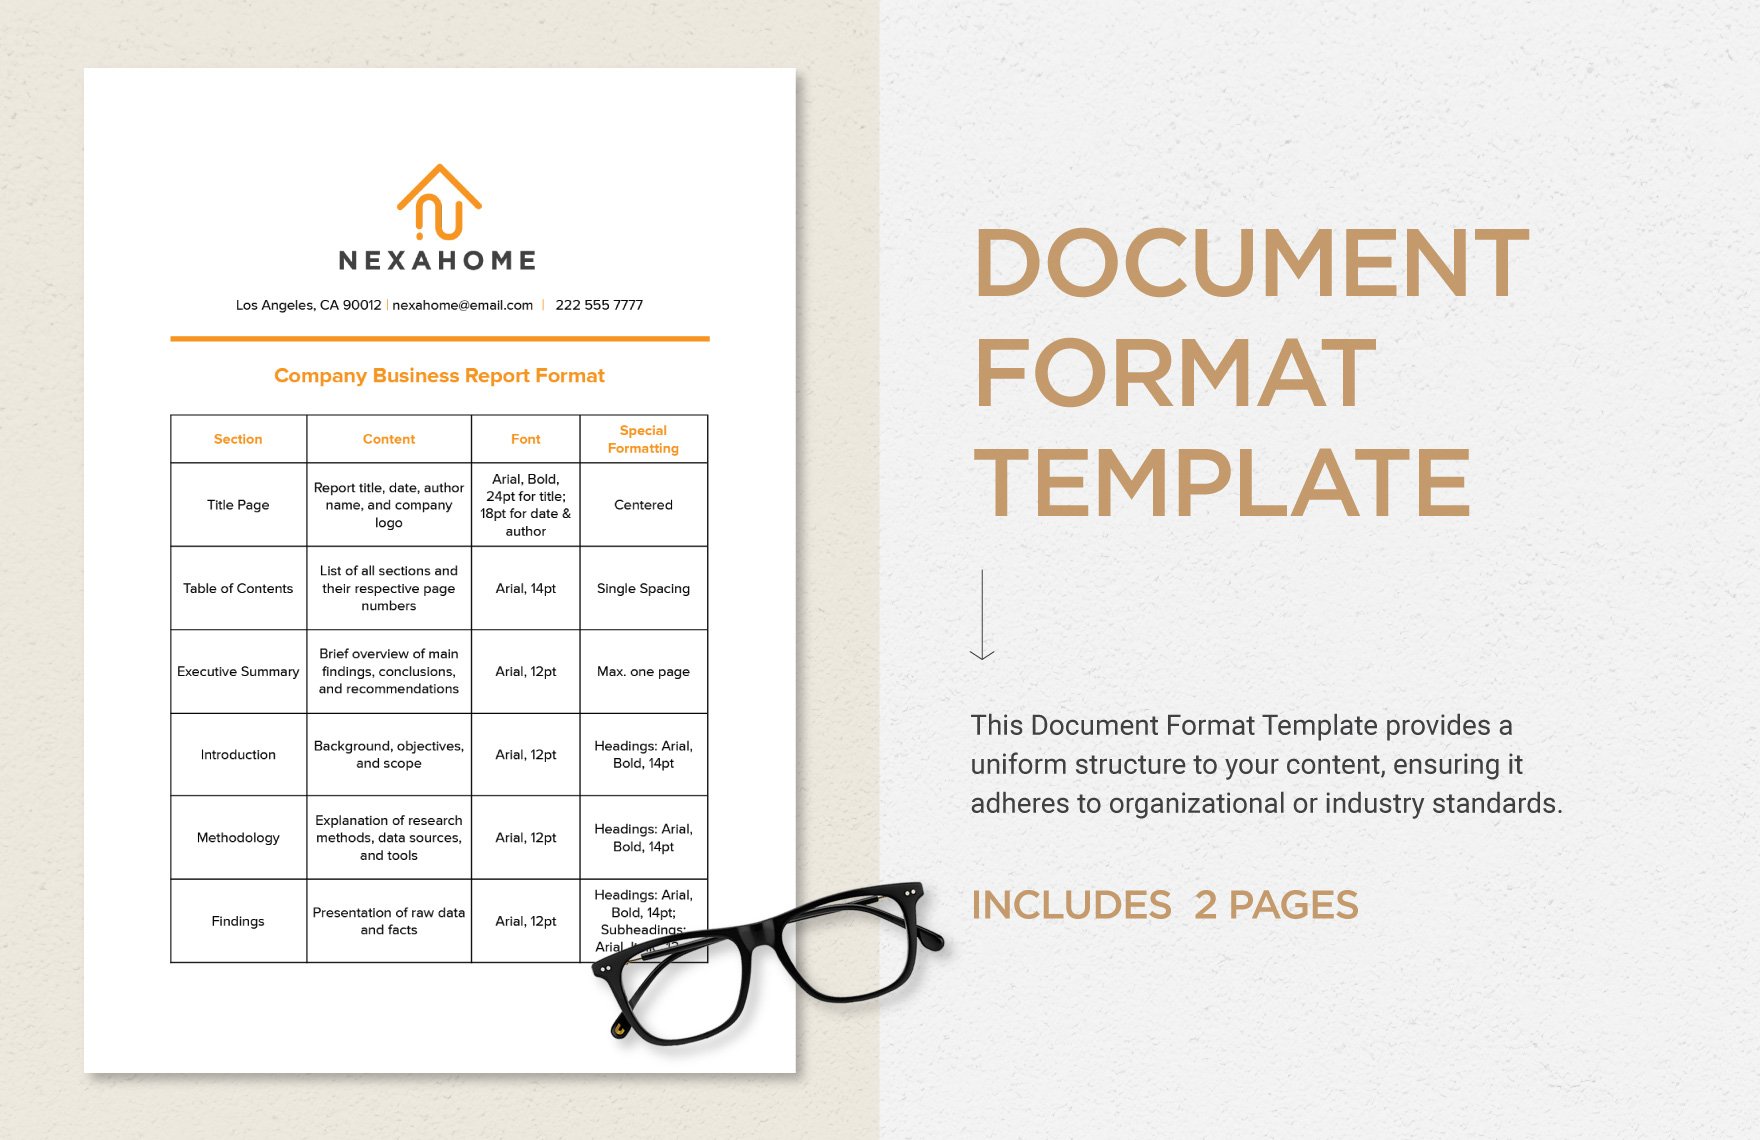 Document Format Template